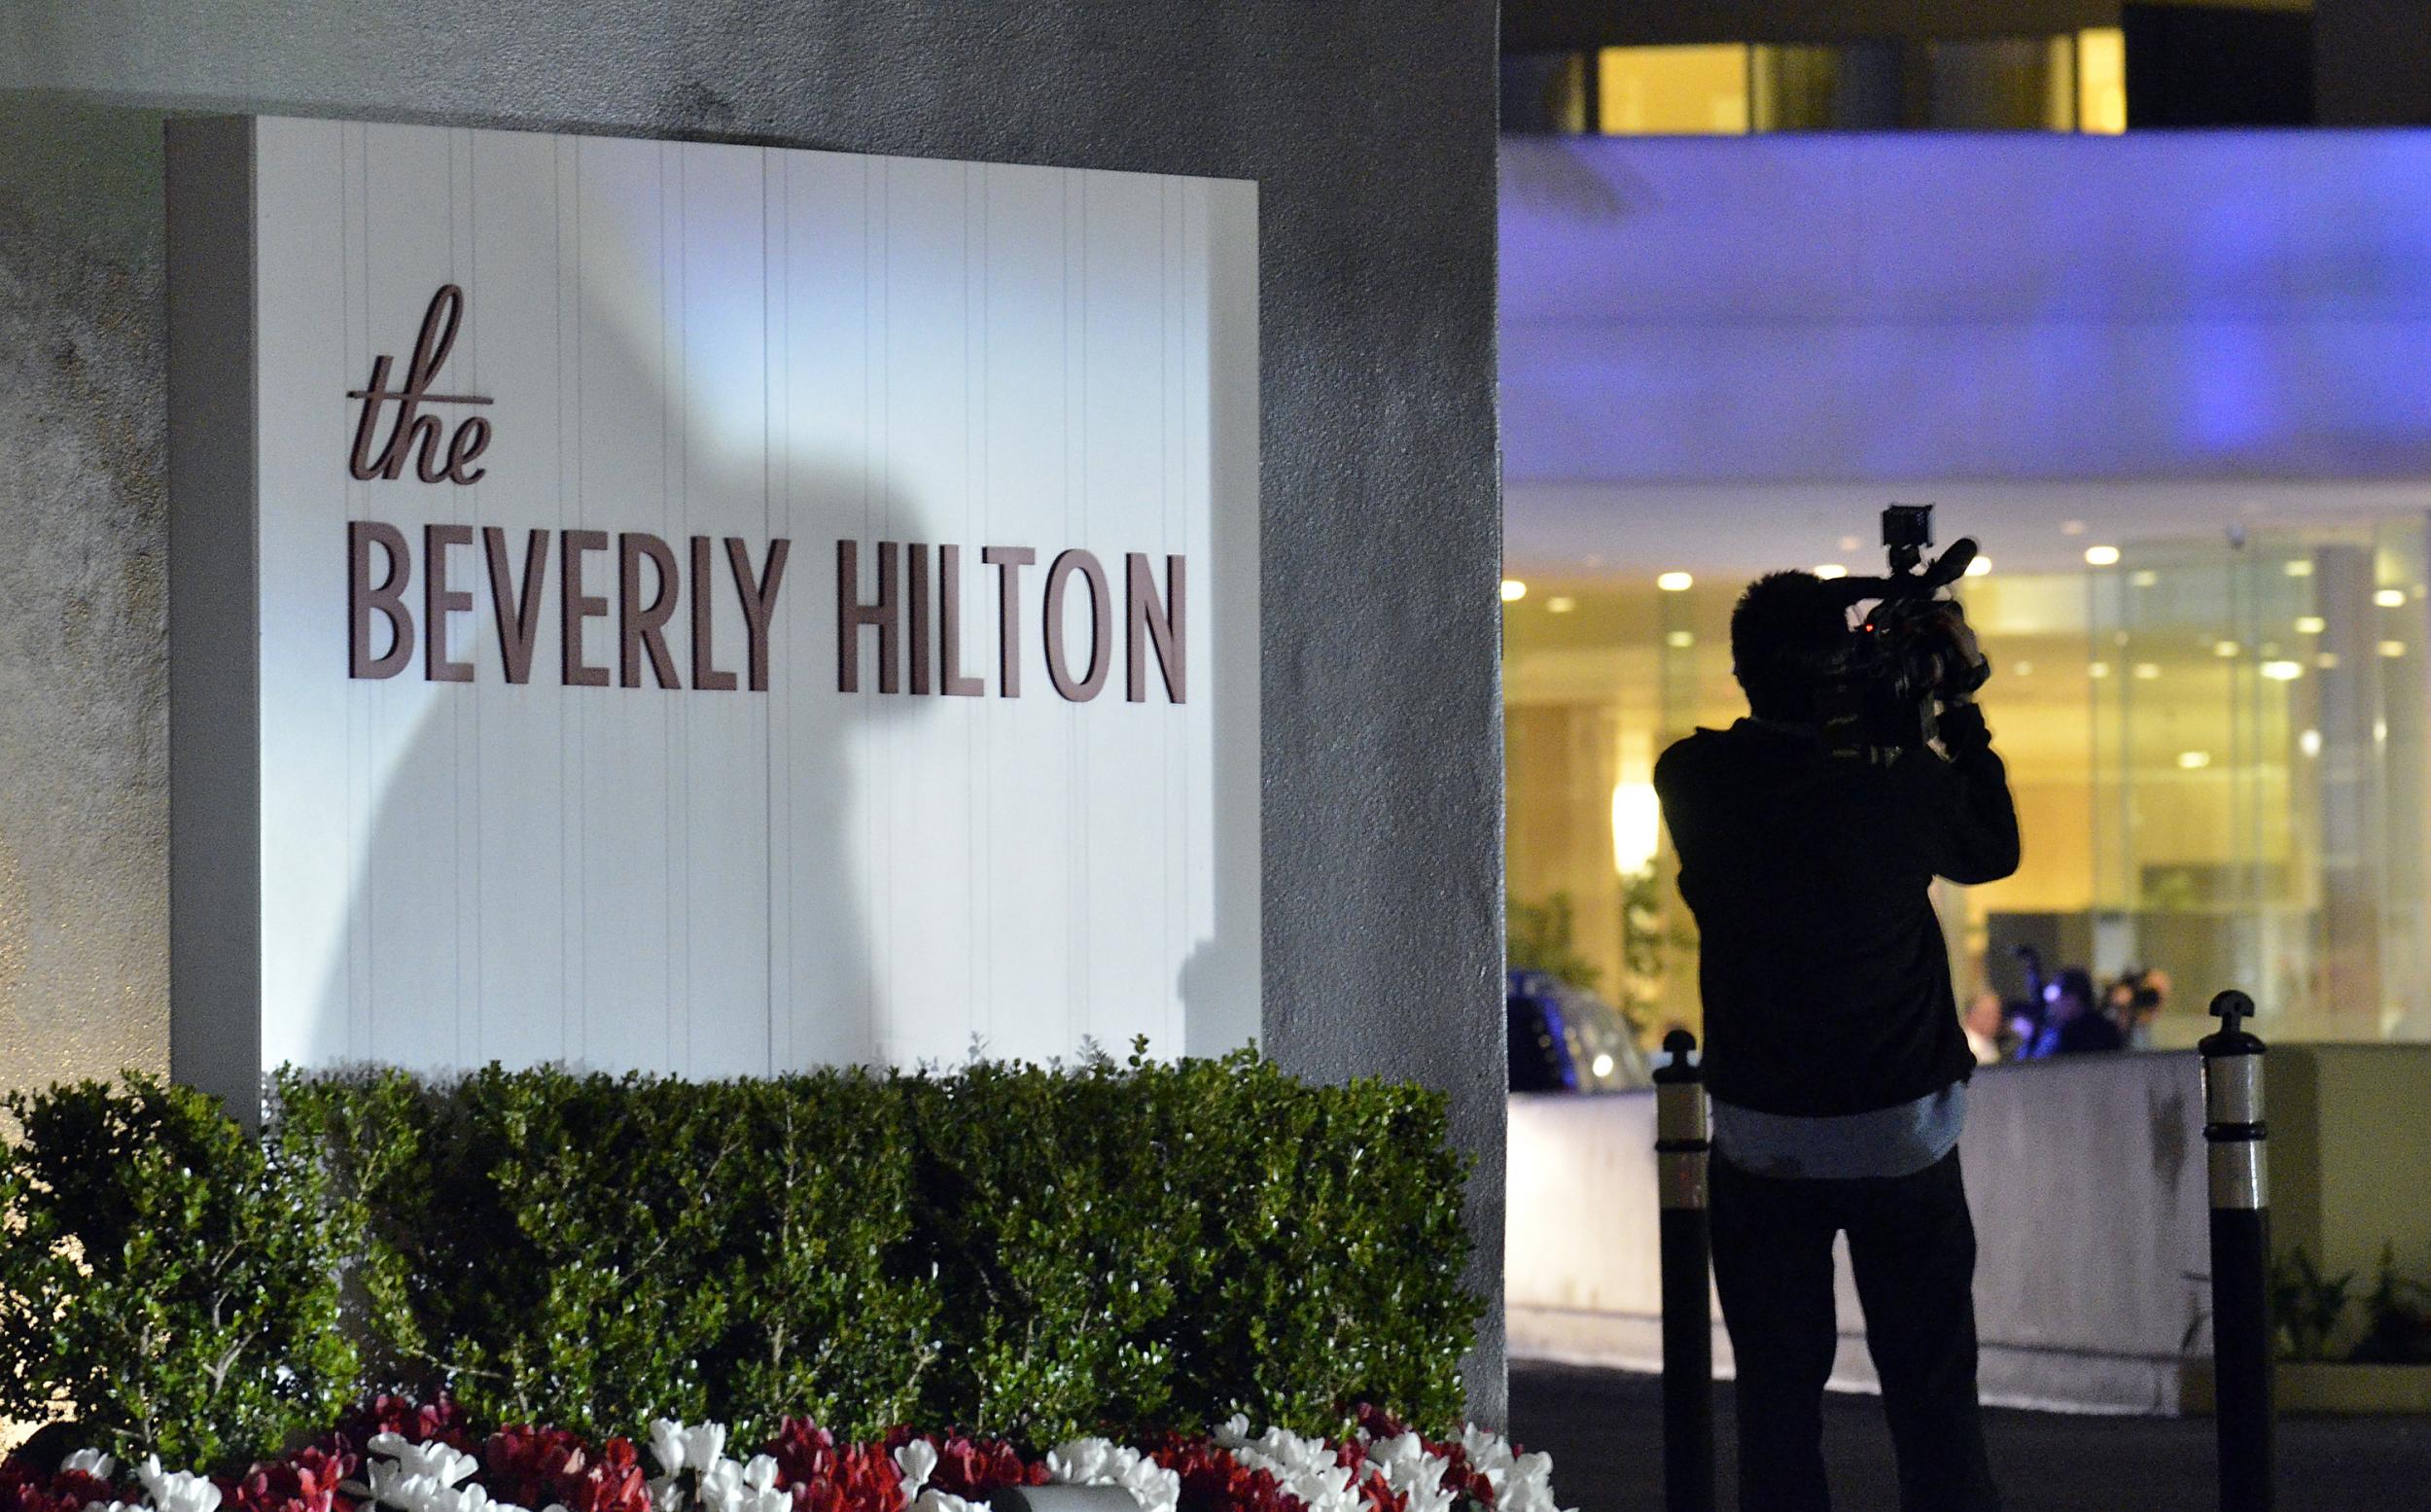 The Beverly Hilton is ground zero for celeb spotting